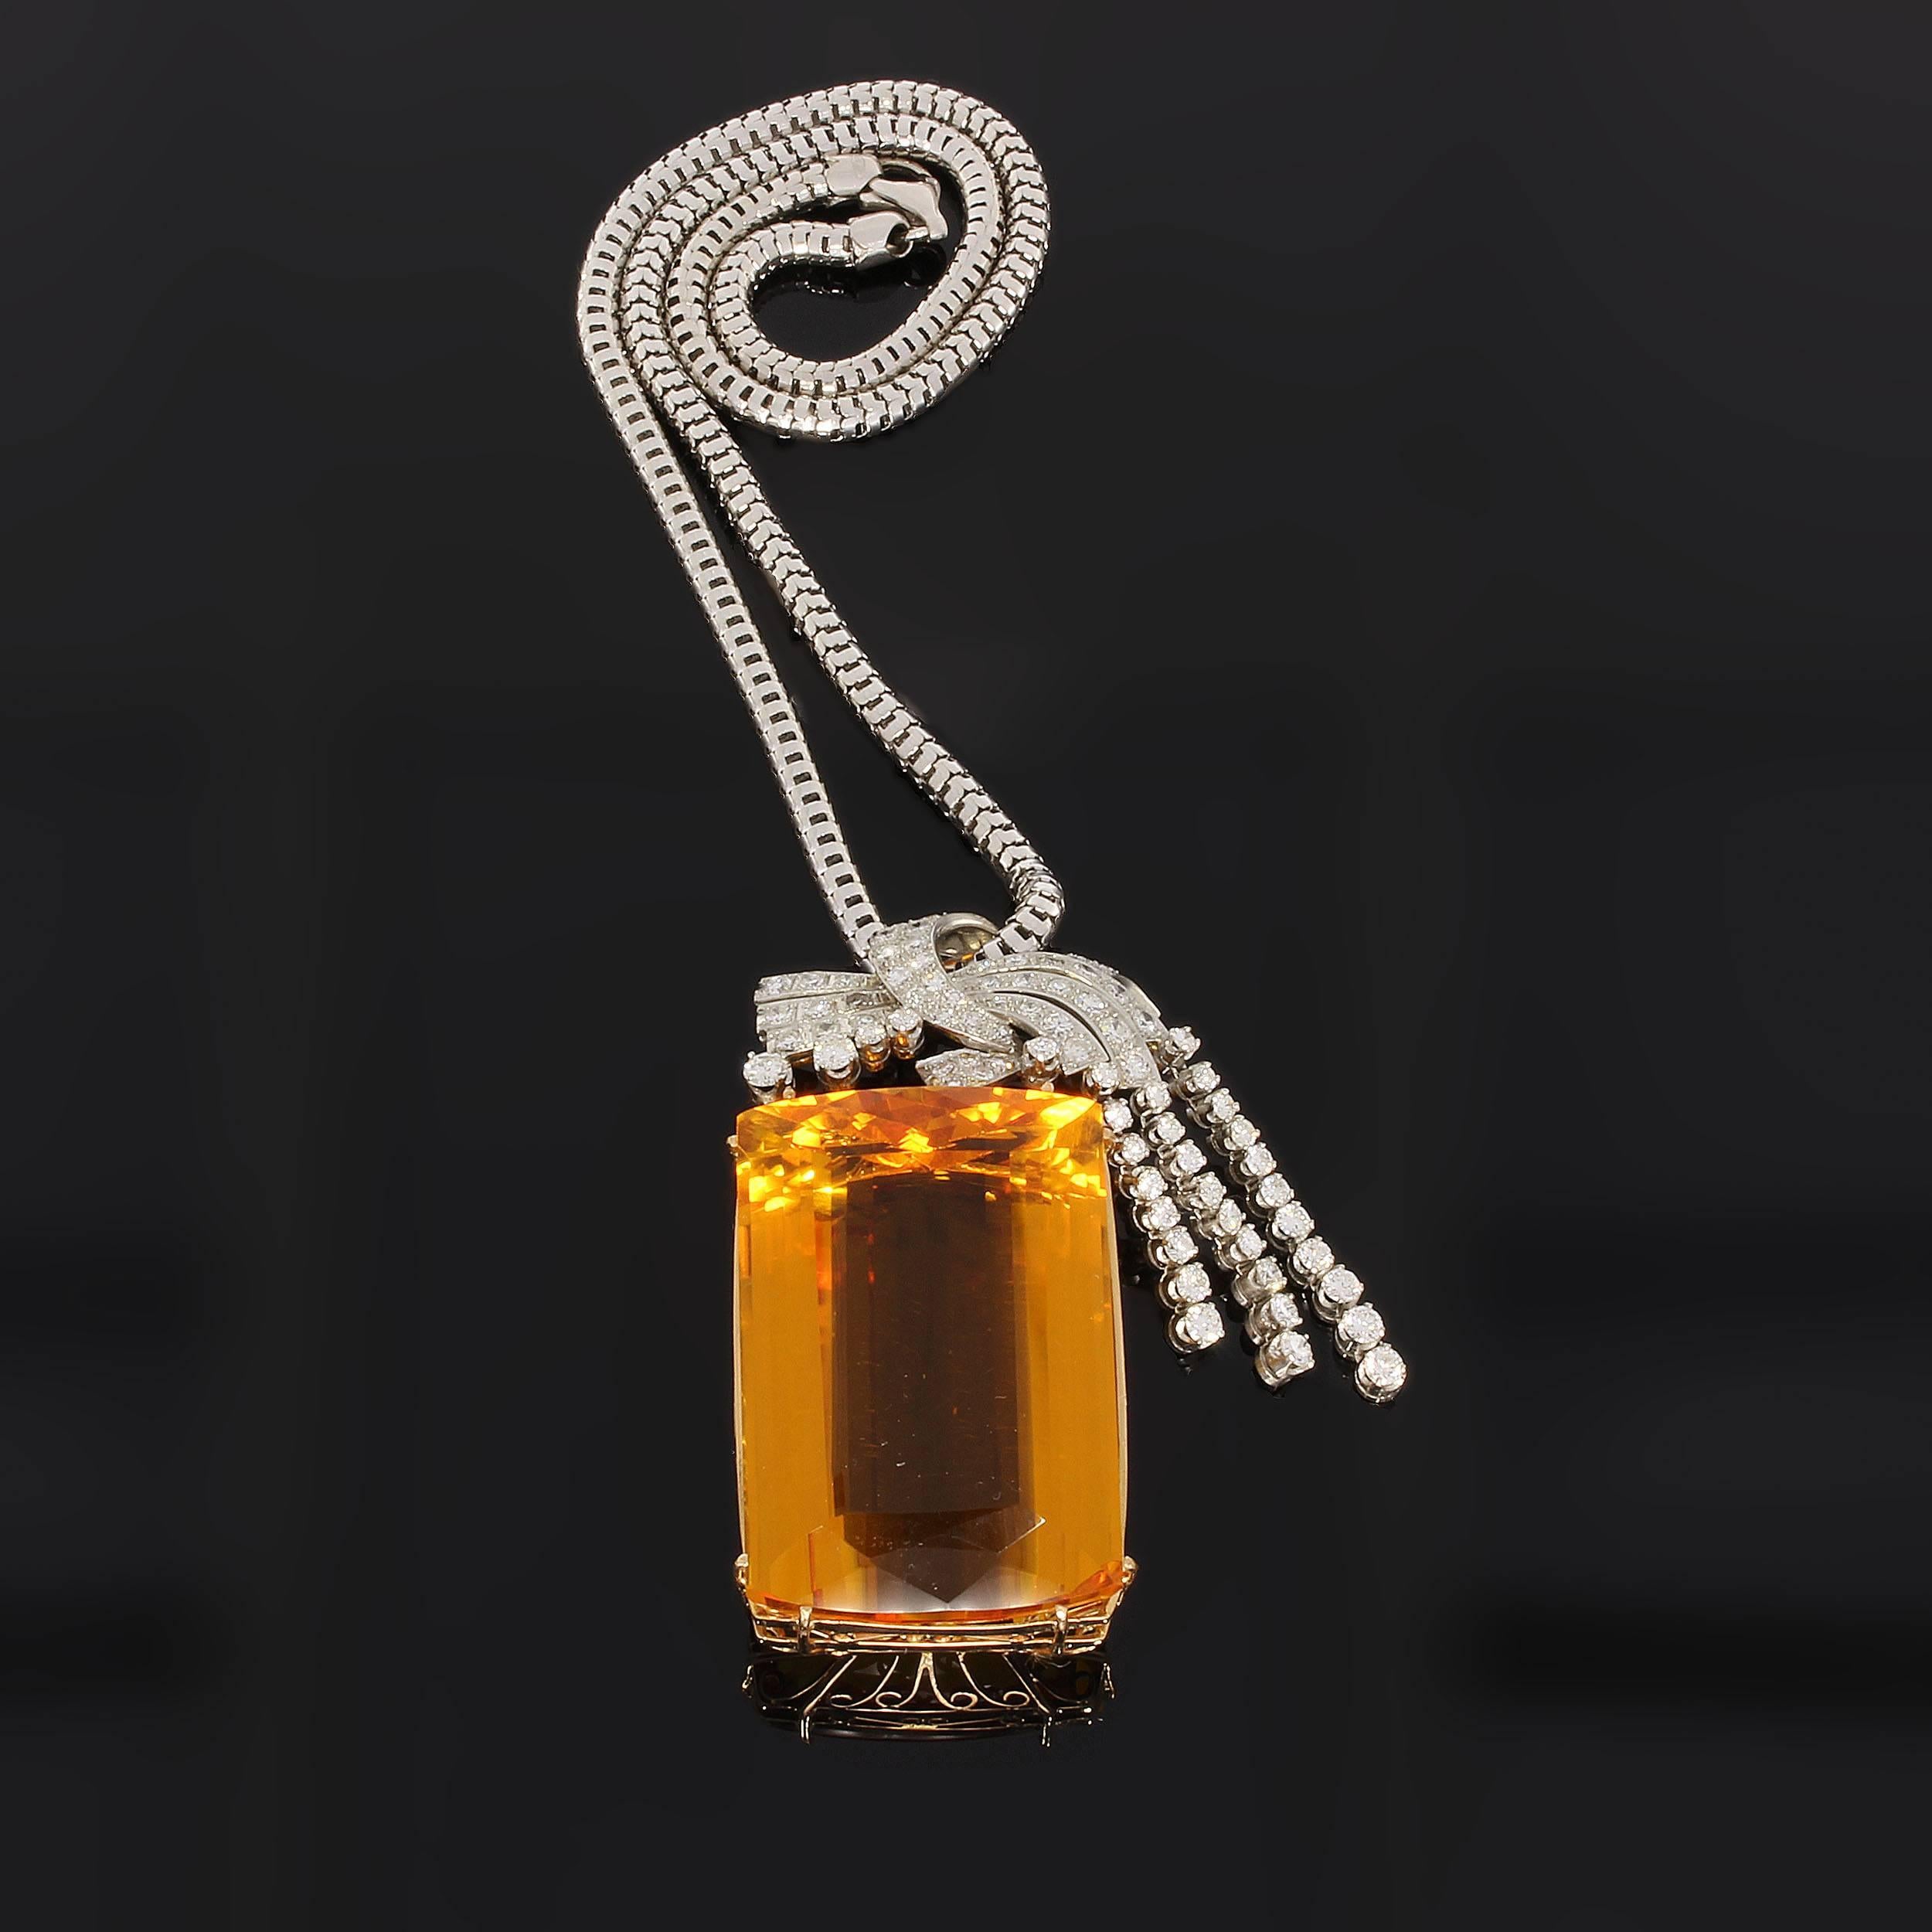 Emerald-cut citrine in beautiful colour, 1.81 x 1.16 in ( 46,01 x 29,52 mm ), Height 0.64 in ( 16,23 mm ) decorated with 84 brilliant-cut diamonds weighing 4.28 carats. White gold chain with carabiner closure. Hallmarked with 750. 
Total weight 77,8